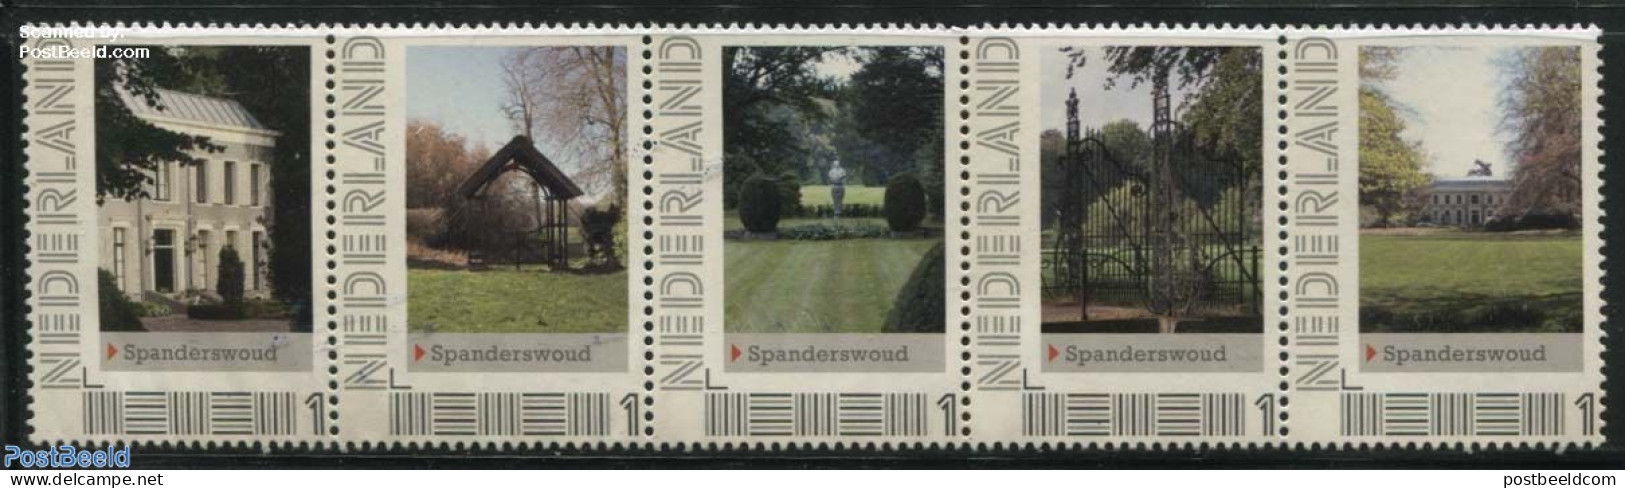 Netherlands - Personal Stamps TNT/PNL 2012 Spanderswoud 5V [::::], Mint NH, Nature - Trees & Forests - Castles & Forti.. - Rotary, Club Leones